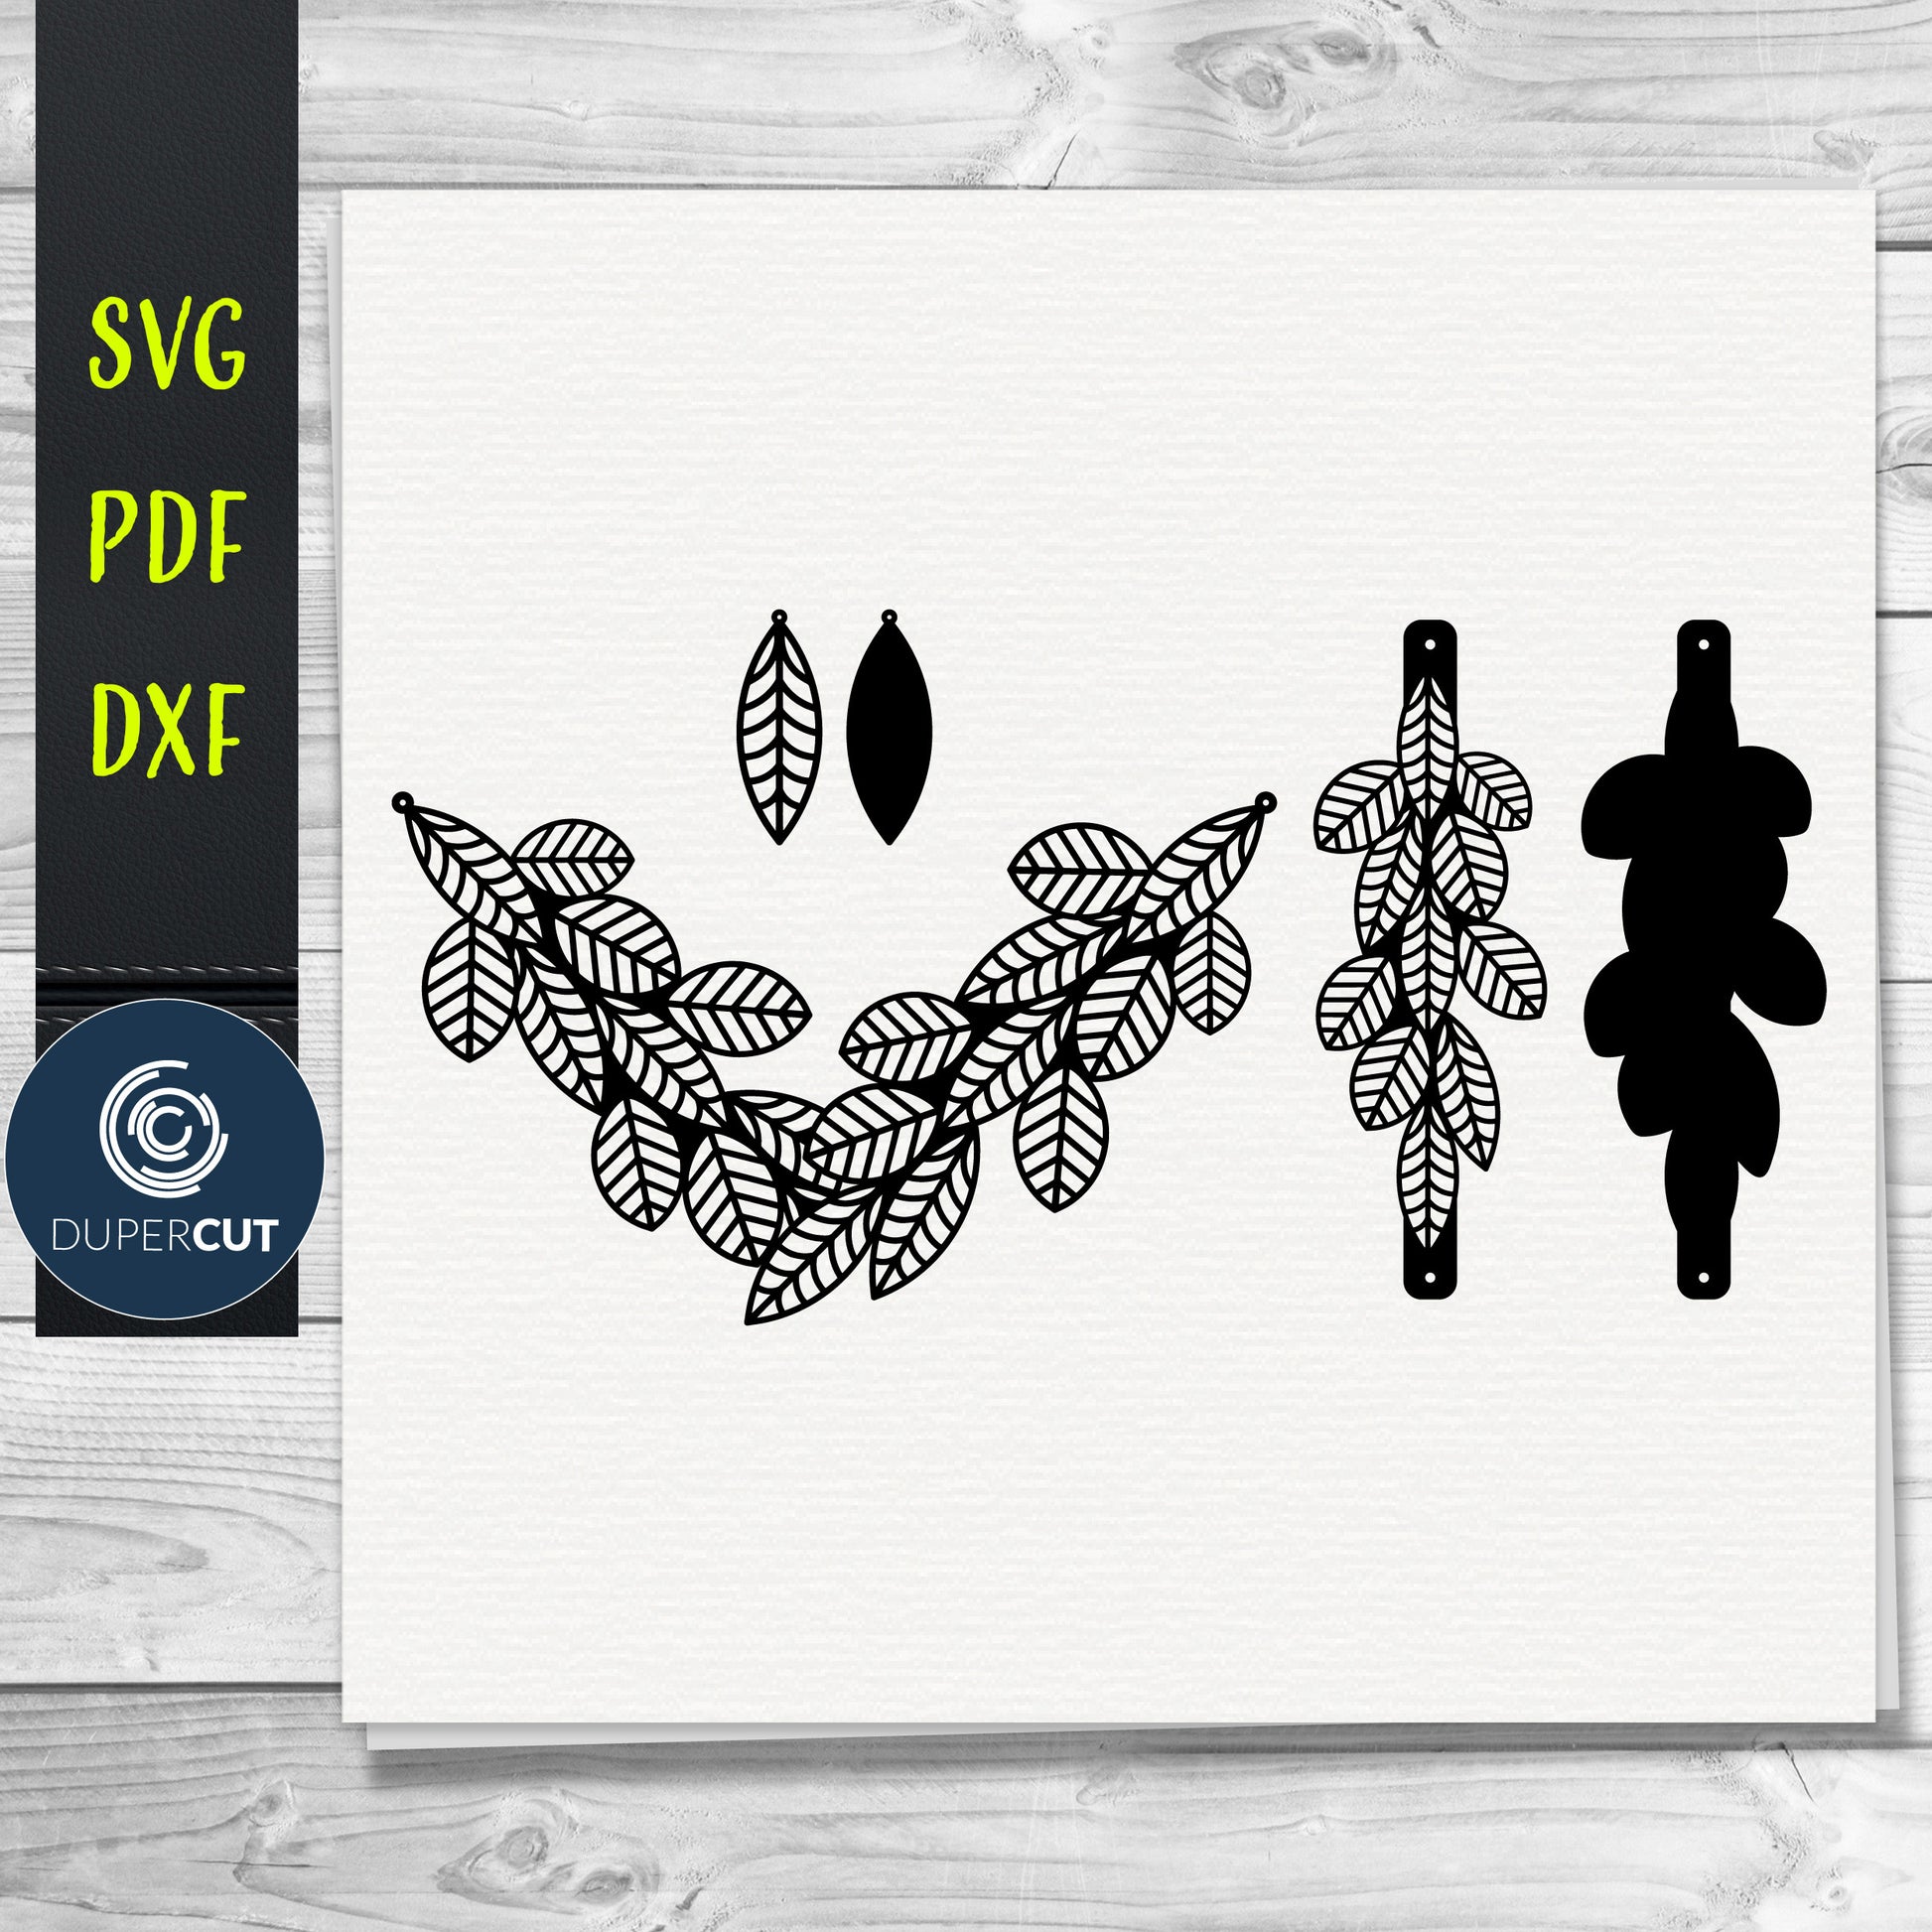 Floral leaves DIY leather layered bracelet.  SVG PDF DXF vector files. Jewellery making template for laser and cutting machines - Glowforge, Cricut, Silhouette Cameo.